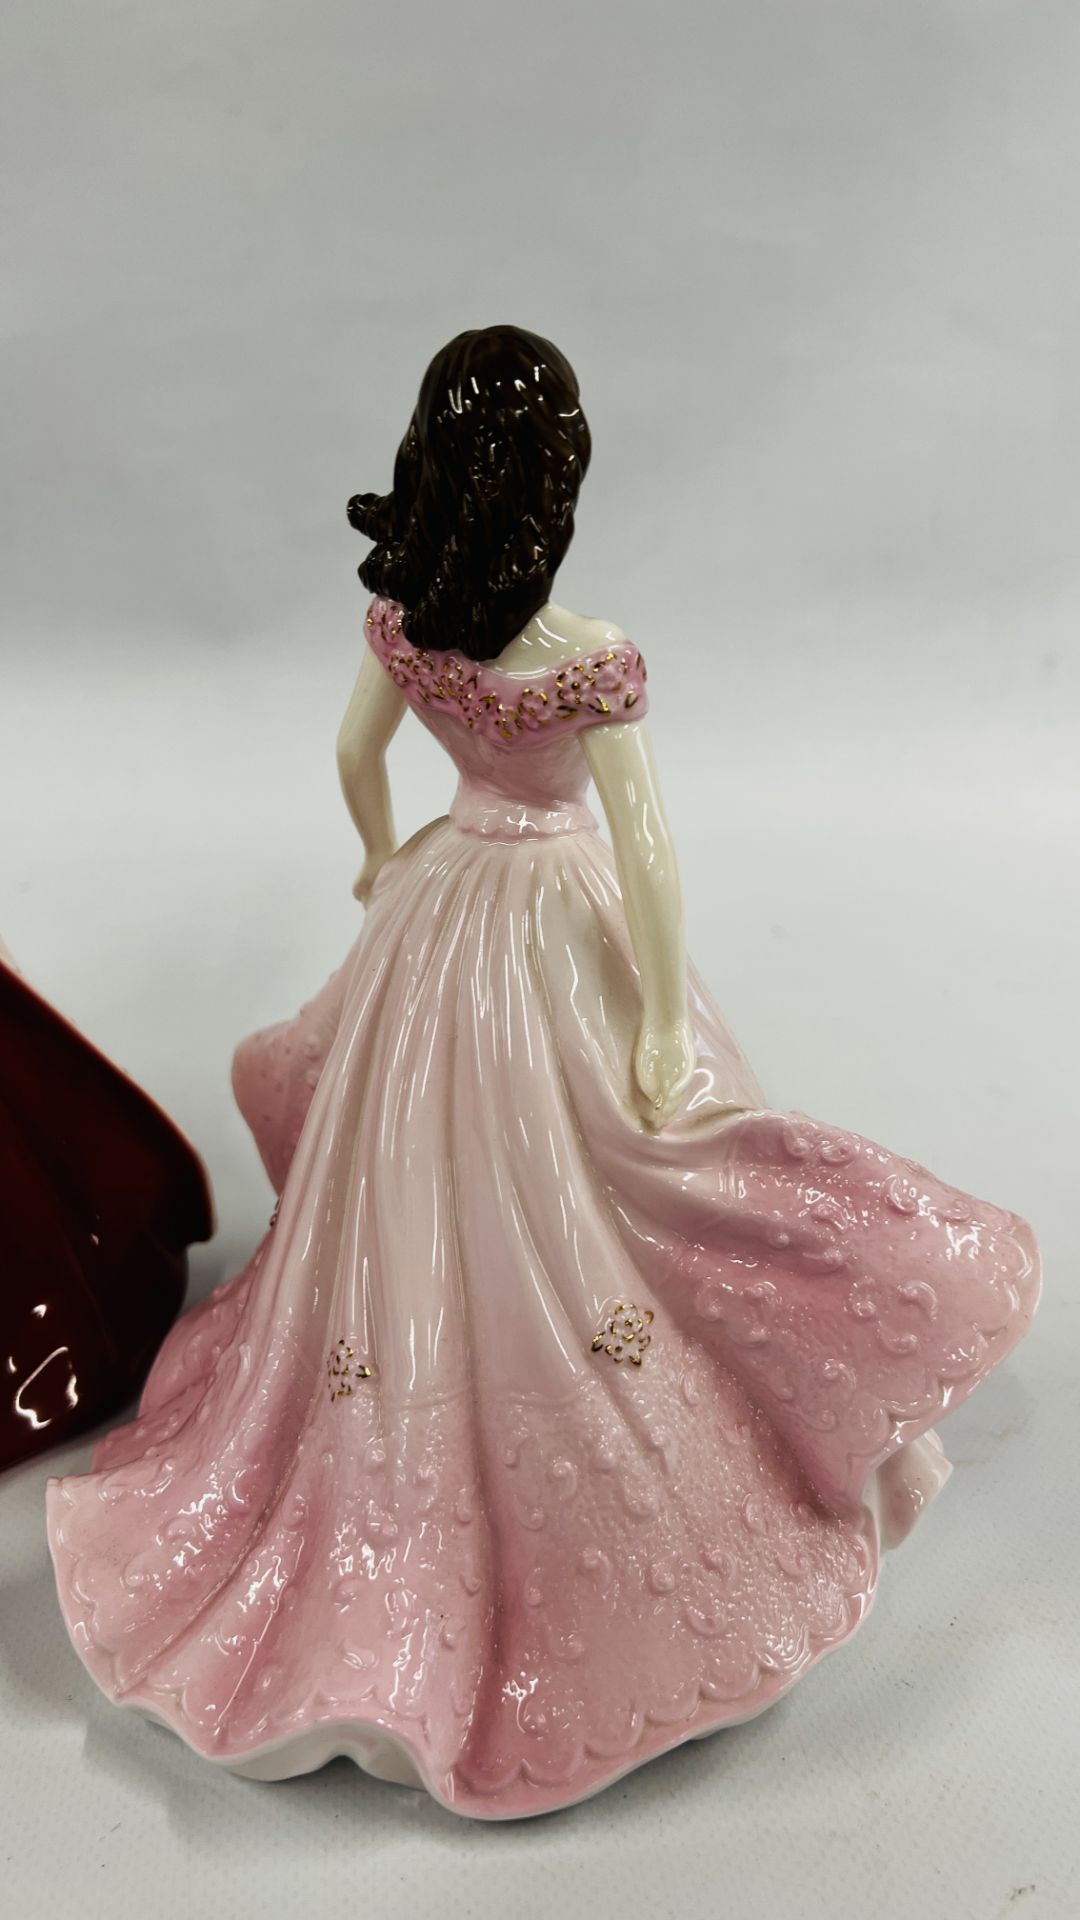 3 COALPORT CABINET COLLECTORS FIGURES TO INCLUDE CLASSIC ELEGANCE "OLIVIA" LIMITED EDITION 1316/7, - Image 9 of 12